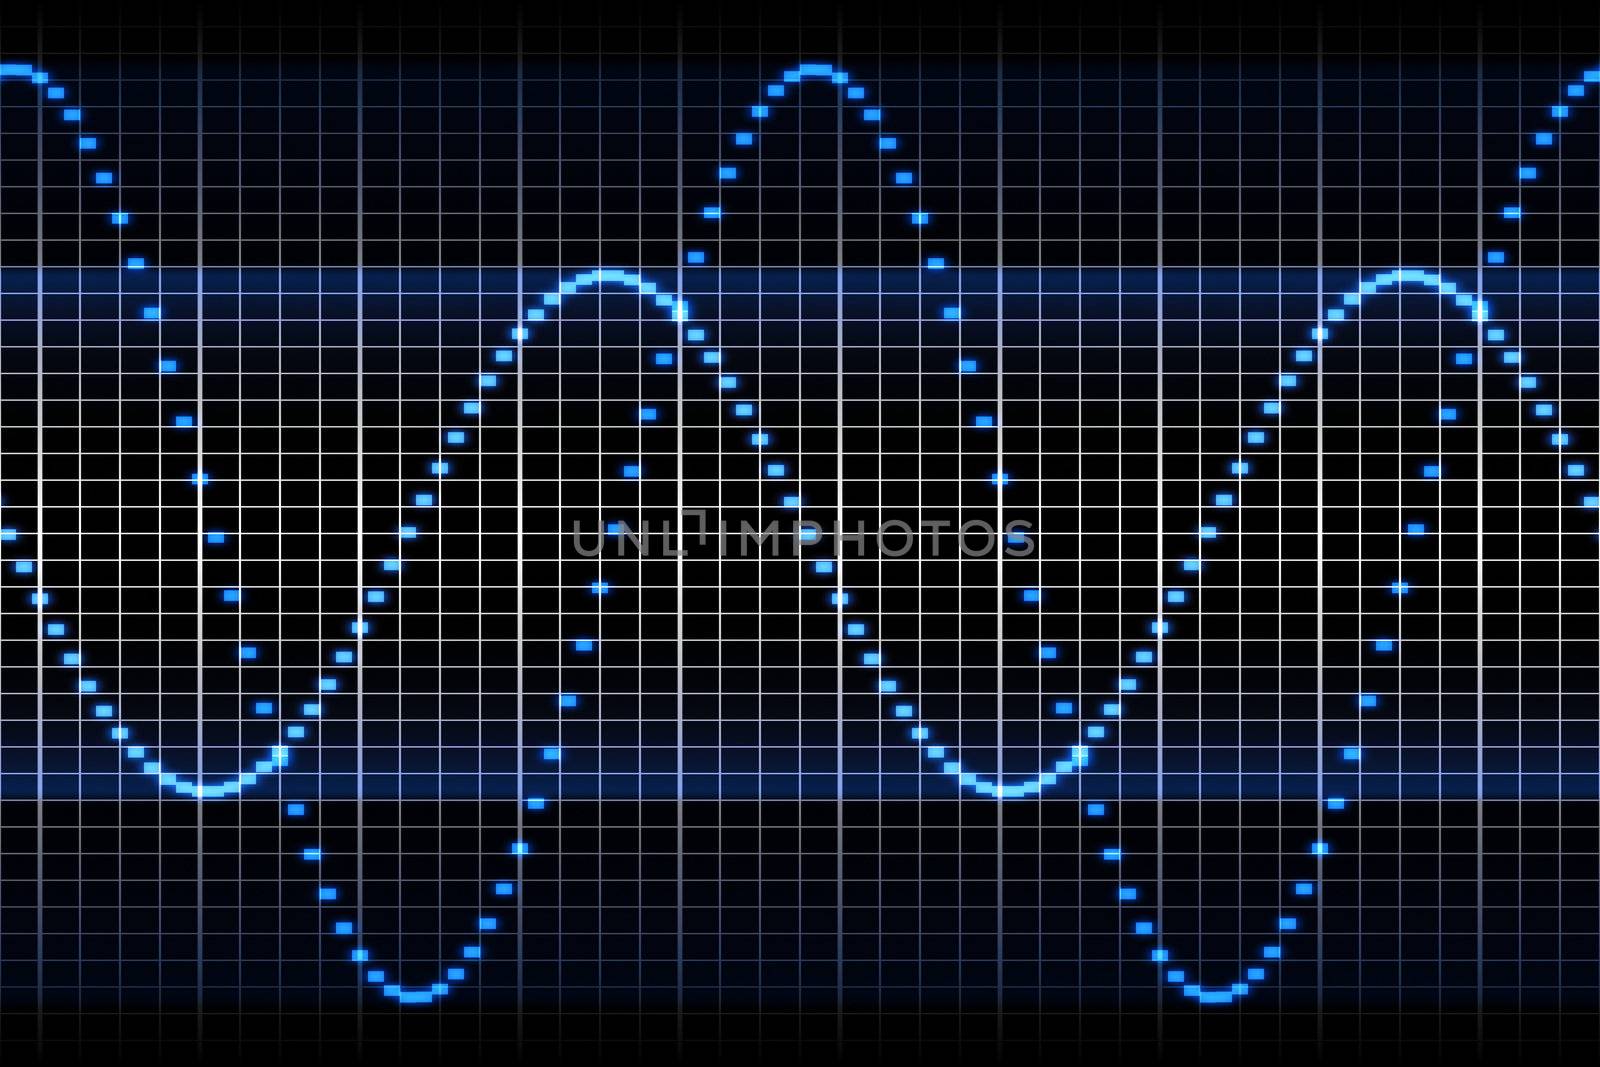 An image of a sound wave graphic